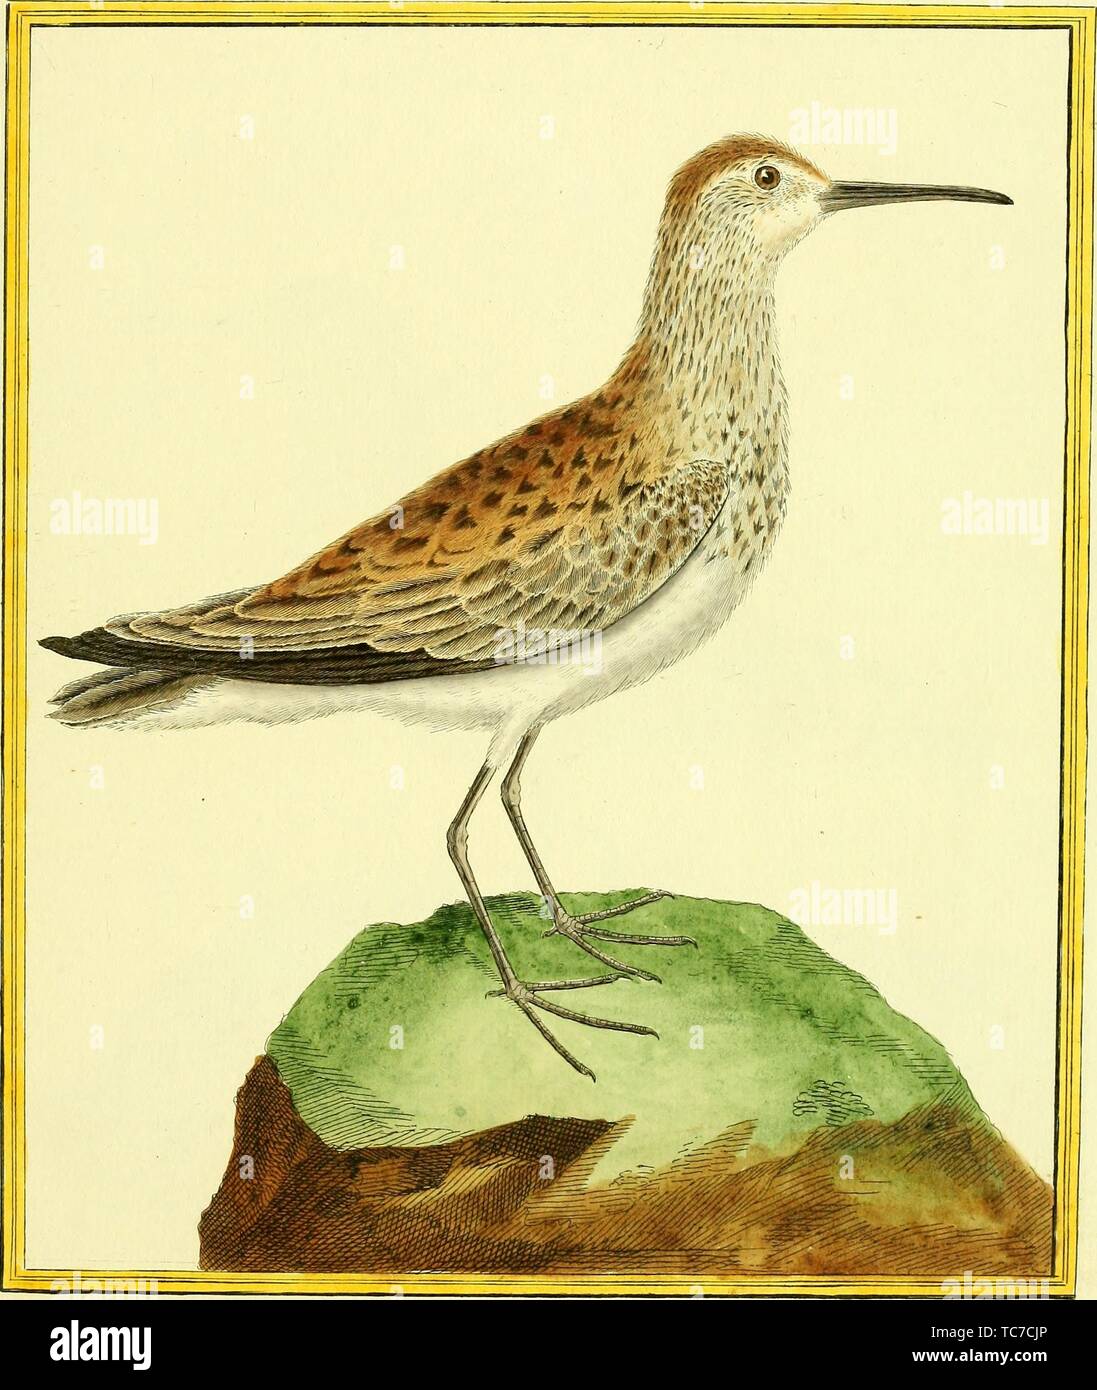 Engraved drawing of the Upland Sandpiper (Bartramia longicauda), from the book 'Planches enluminees Dhistoire naturelle' by Francois Nicolas, Louis Jean Marie Daubenton, and Edme-Louis Daubenton, 1765. Courtesy Internet Archive. () Stock Photo